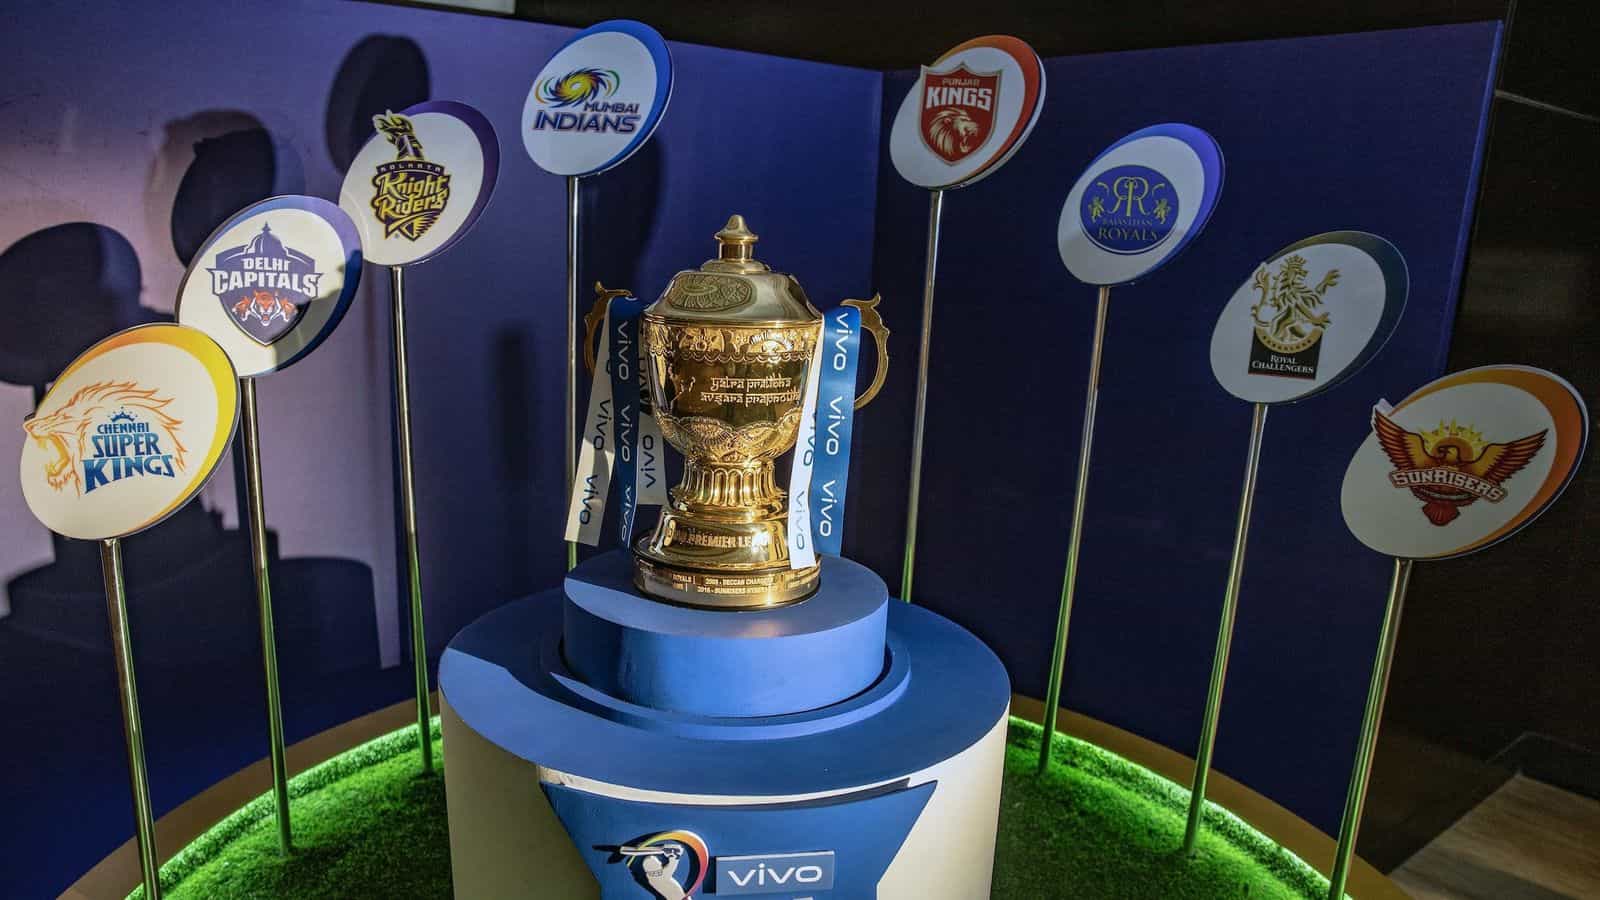 IPL 2021 schedule announced: Full list of fixtures, timings, dates, venues